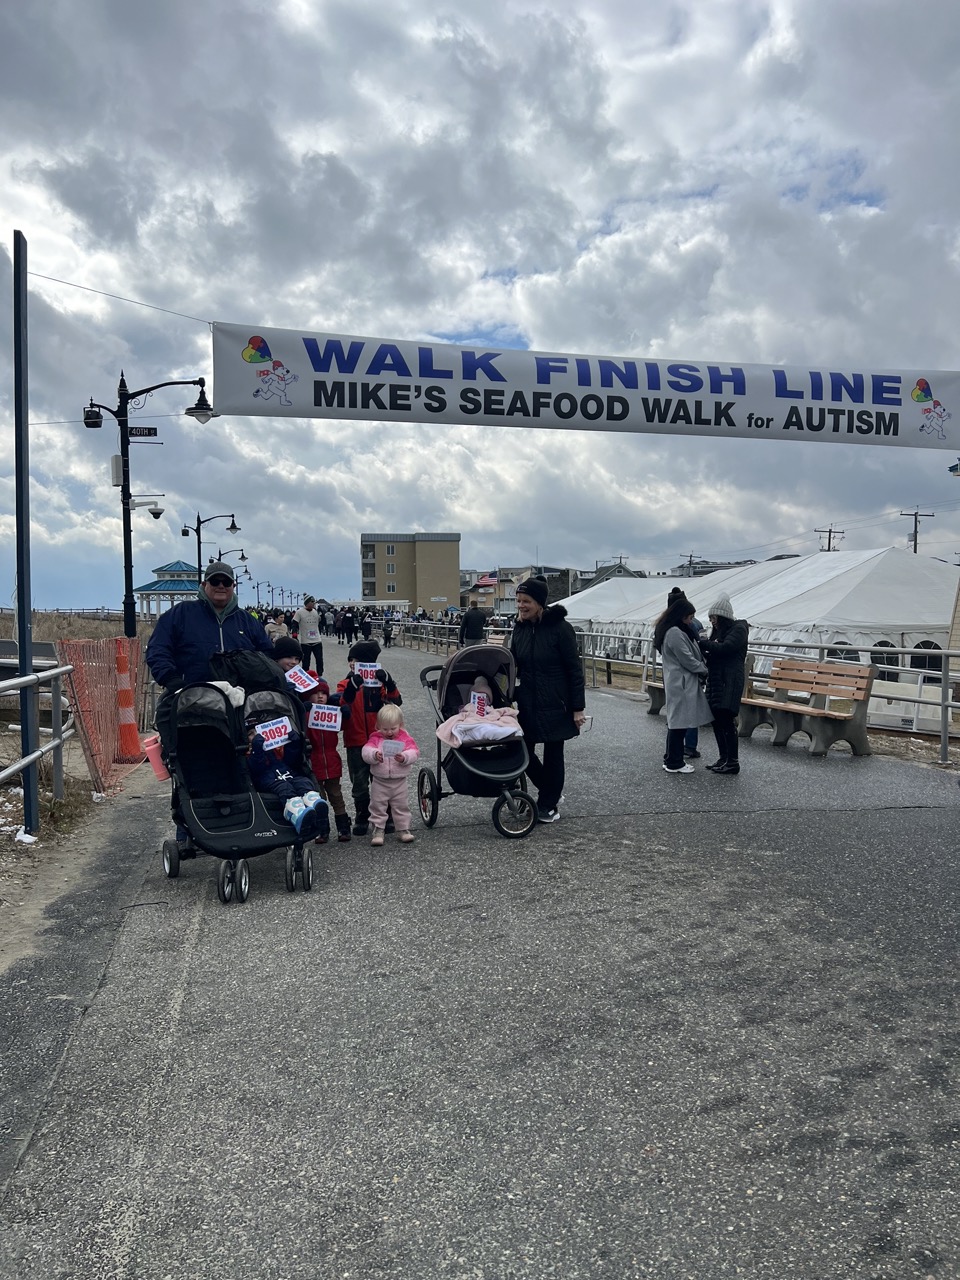 Polar Plunge Weekend: Mike's Run/Walk for Autism, grandparents and kids